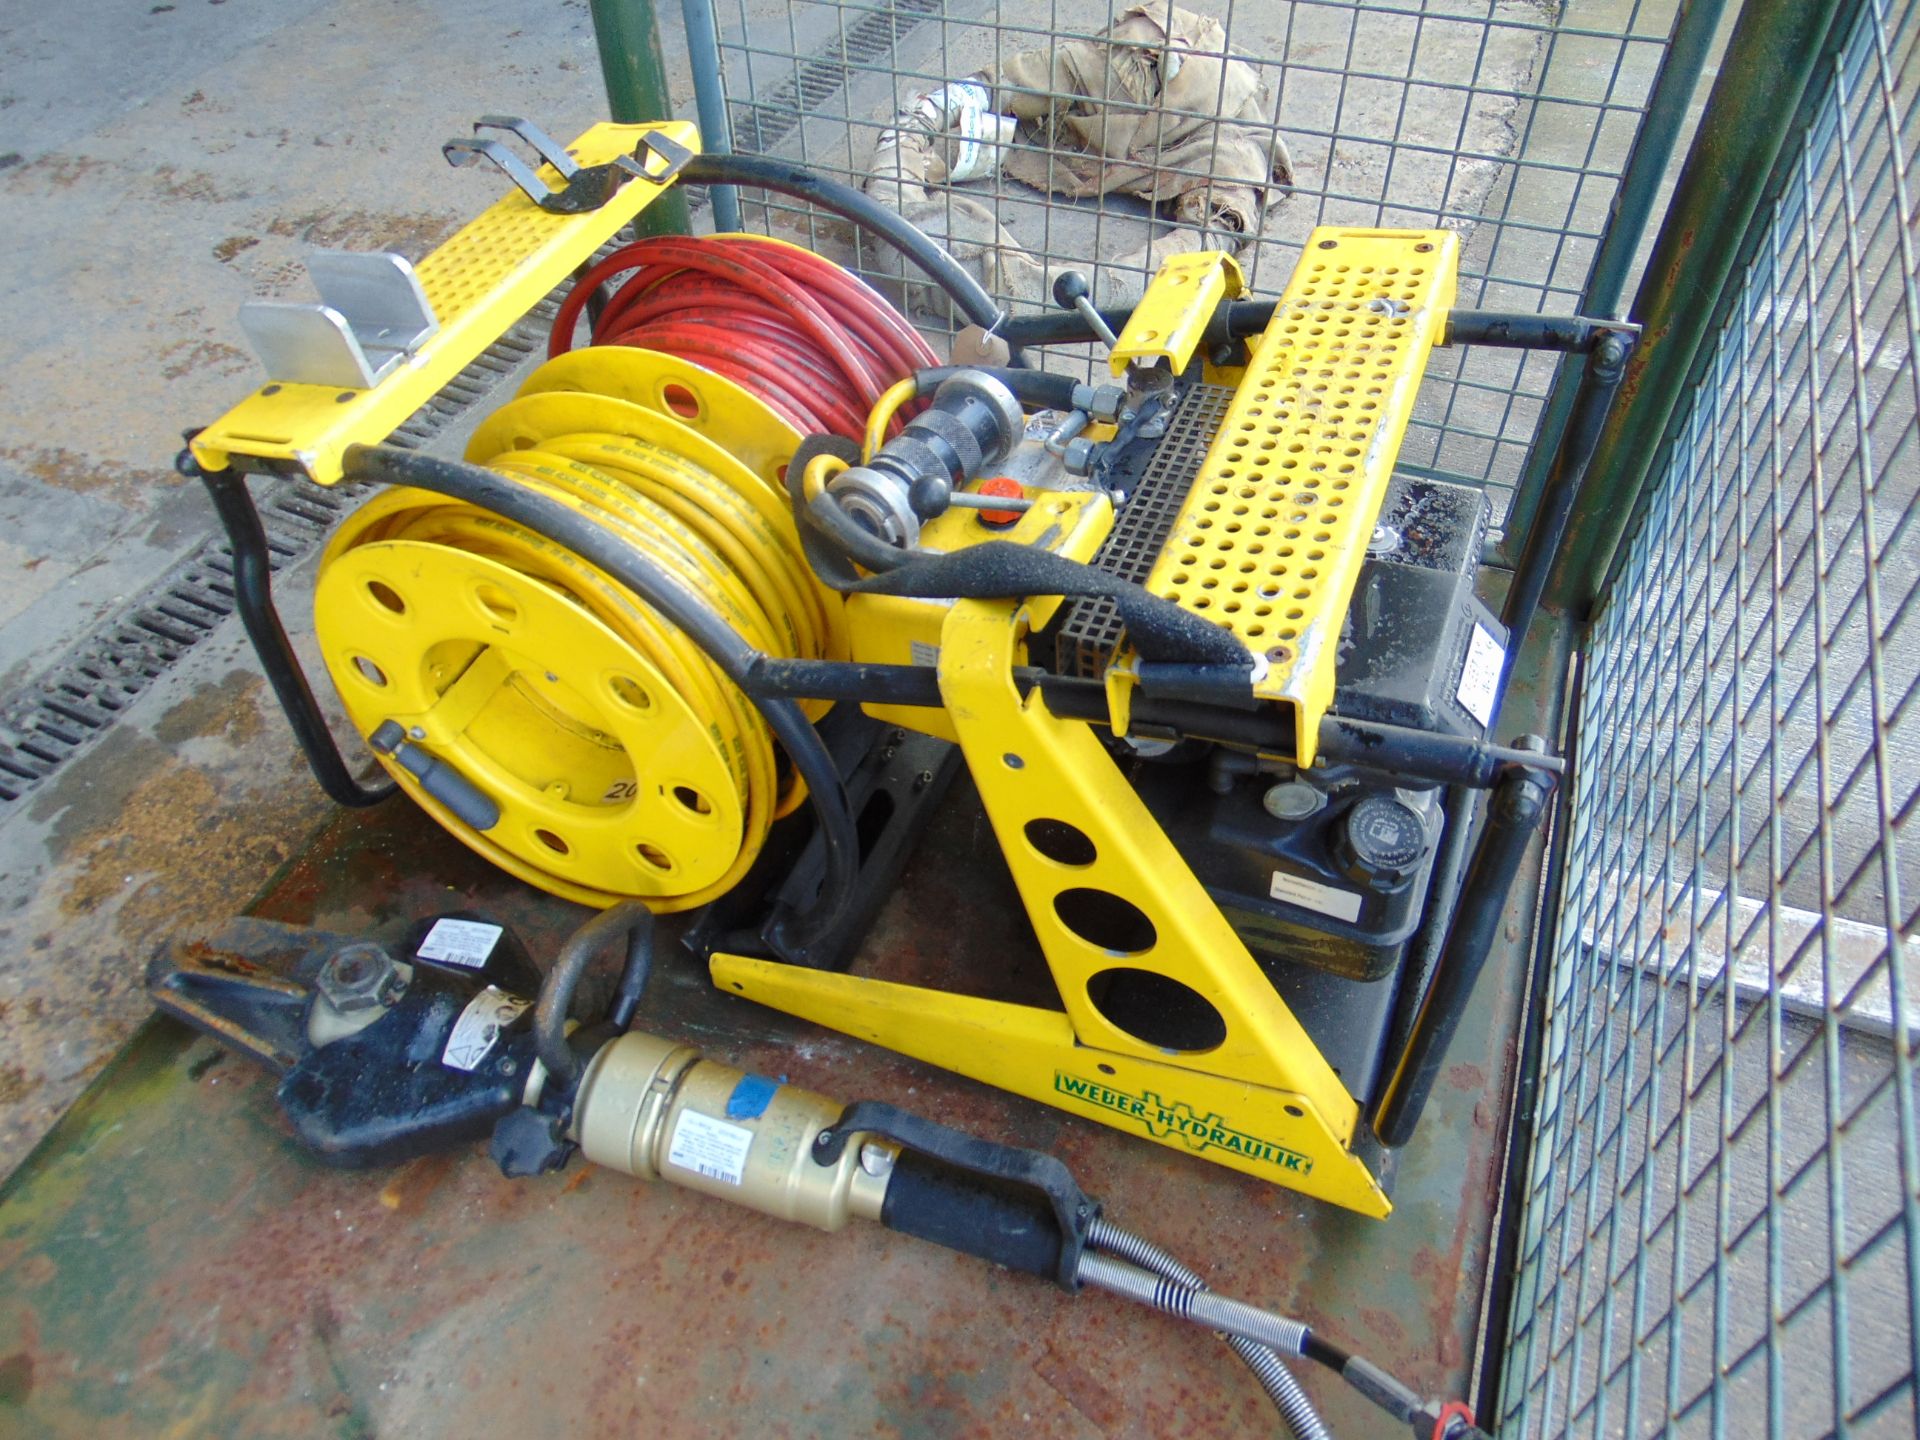 Weber Hydraulic Jaws of Life Rescue Equipment - Image 3 of 7